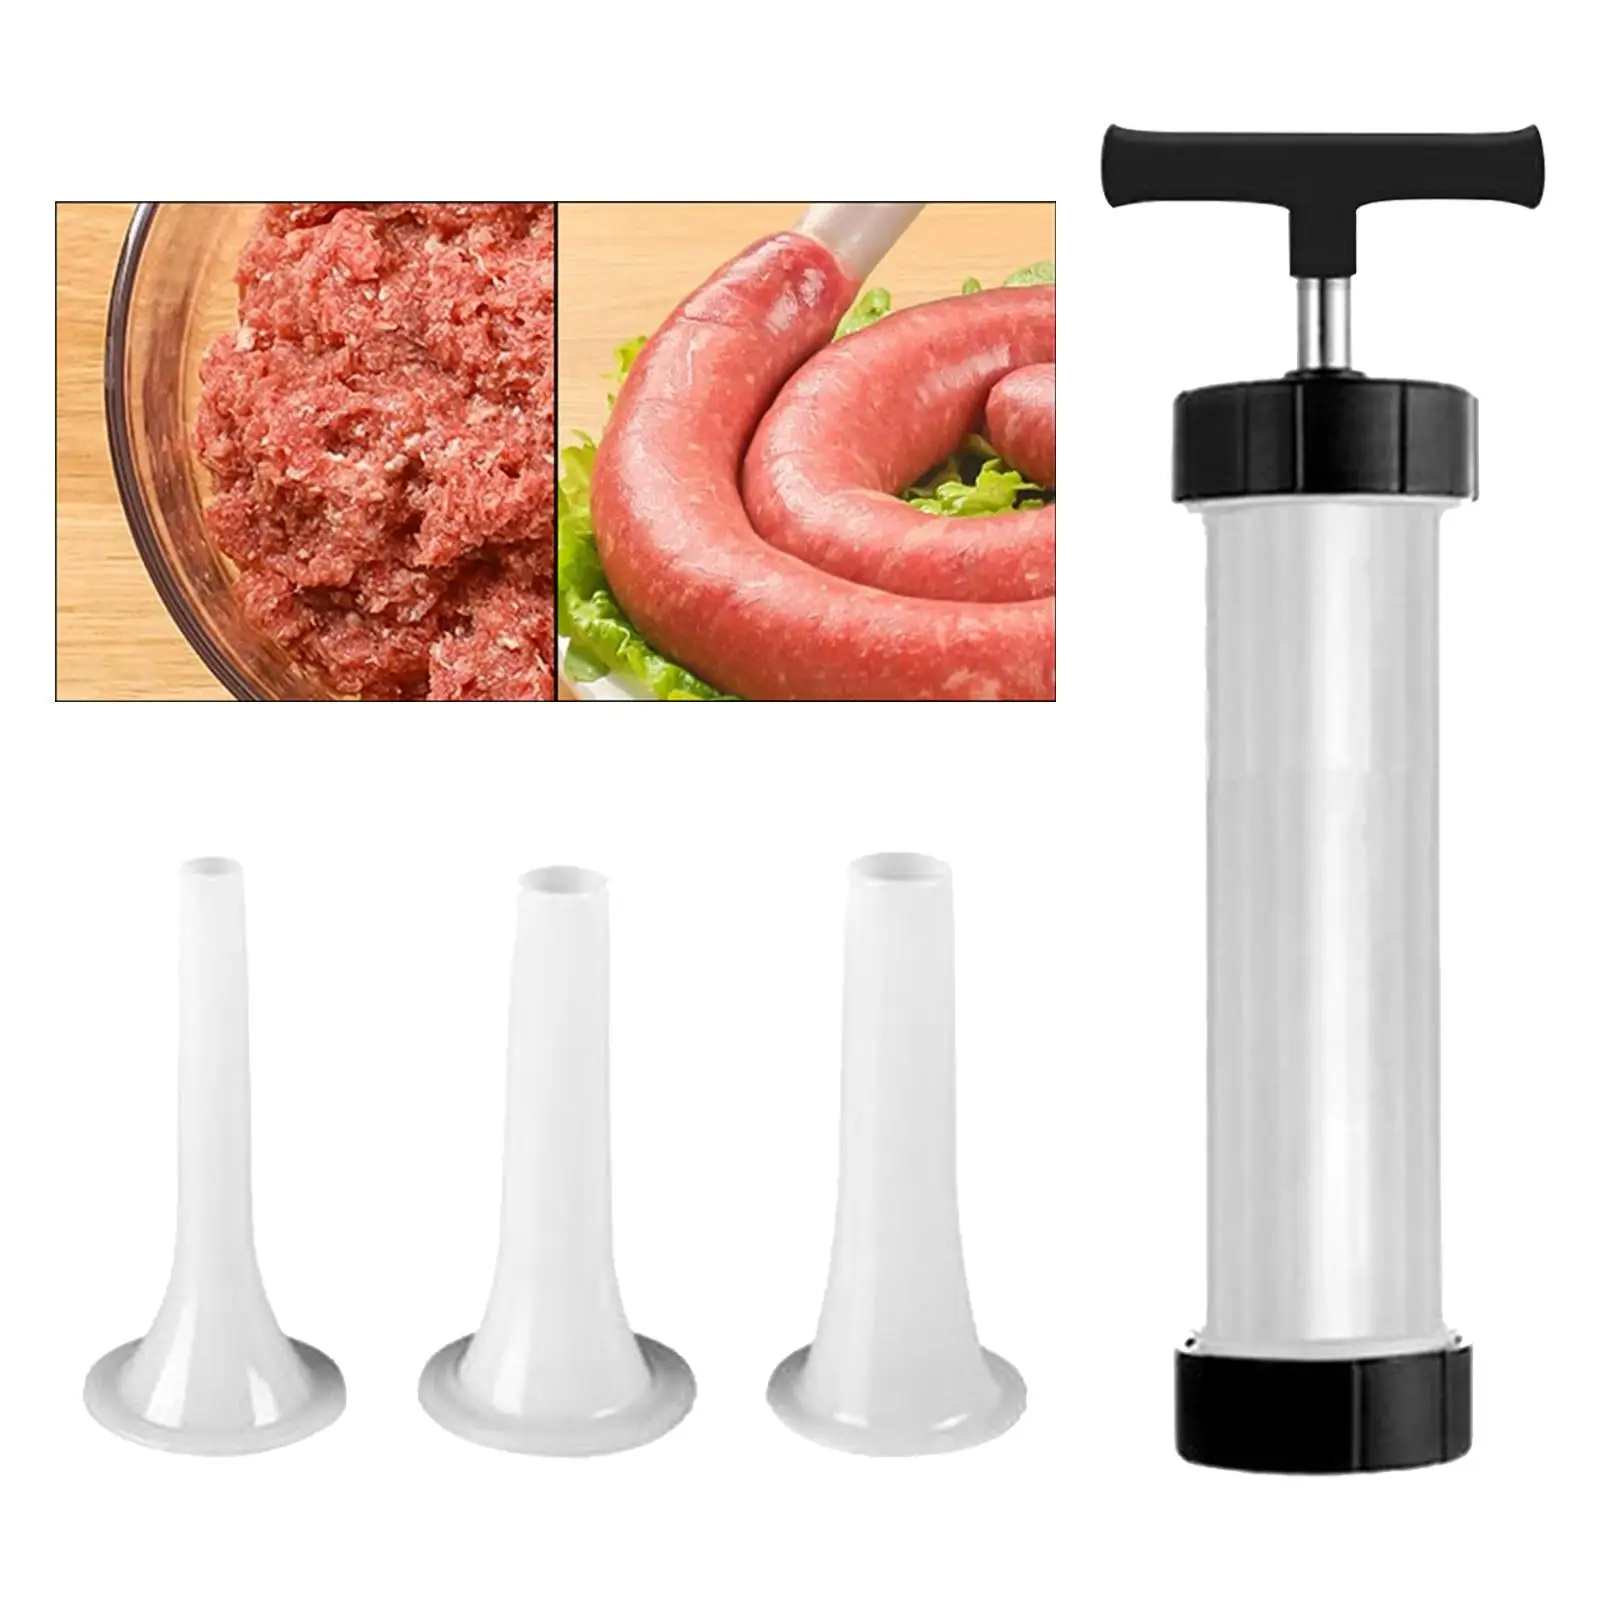 Manual Sausage Stuffer Machine with 3 Nozzles Stuffer for Household Sausage Maker Sausage Stuffer Sausage Meat Filling Tools